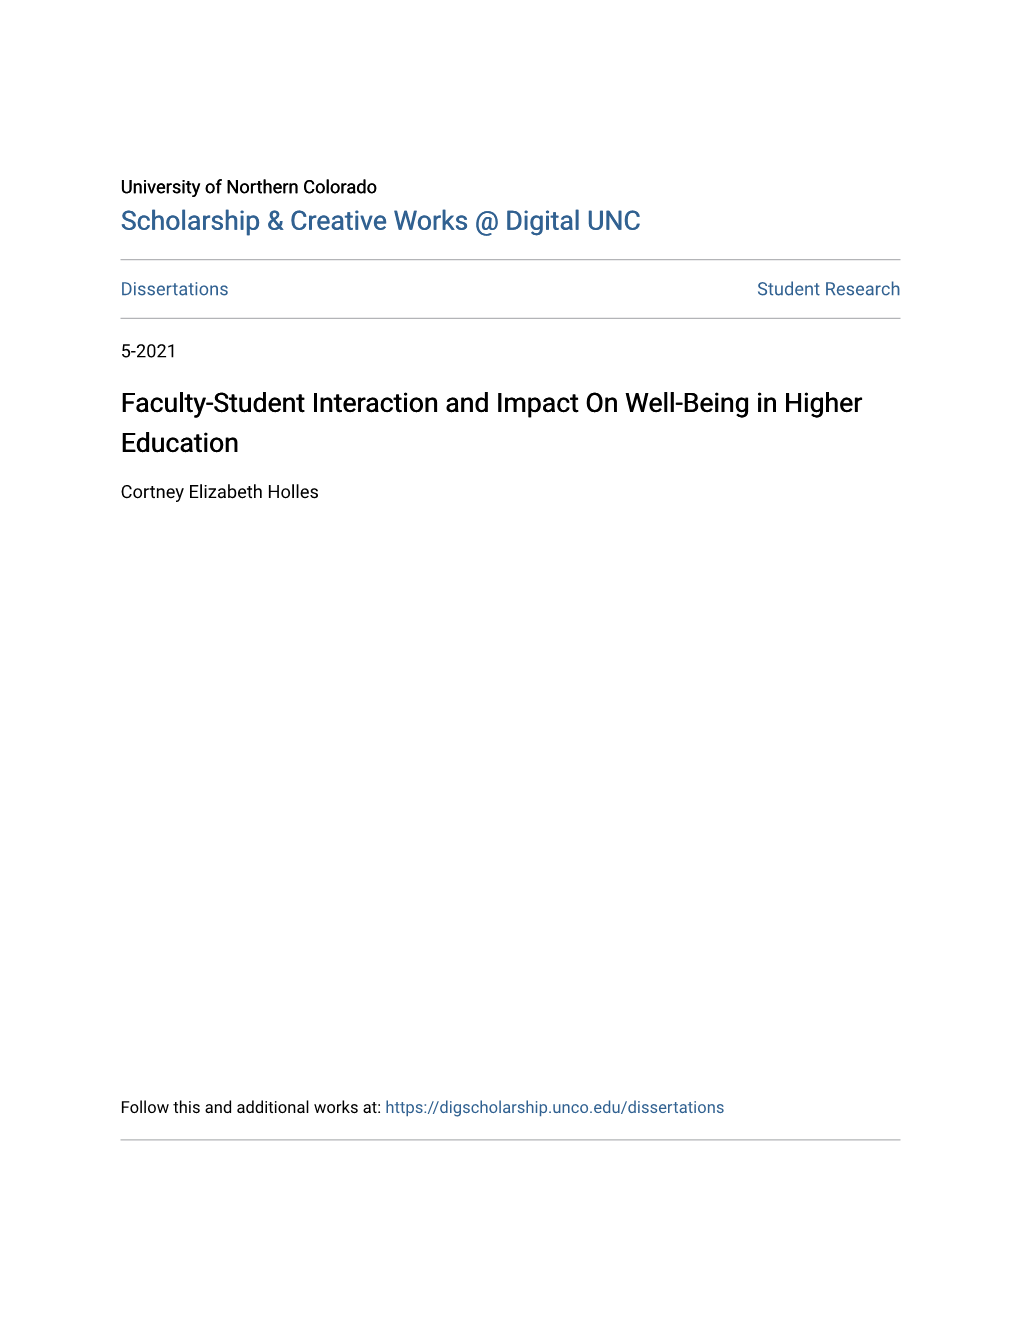 Faculty-Student Interaction and Impact on Well-Being in Higher Education